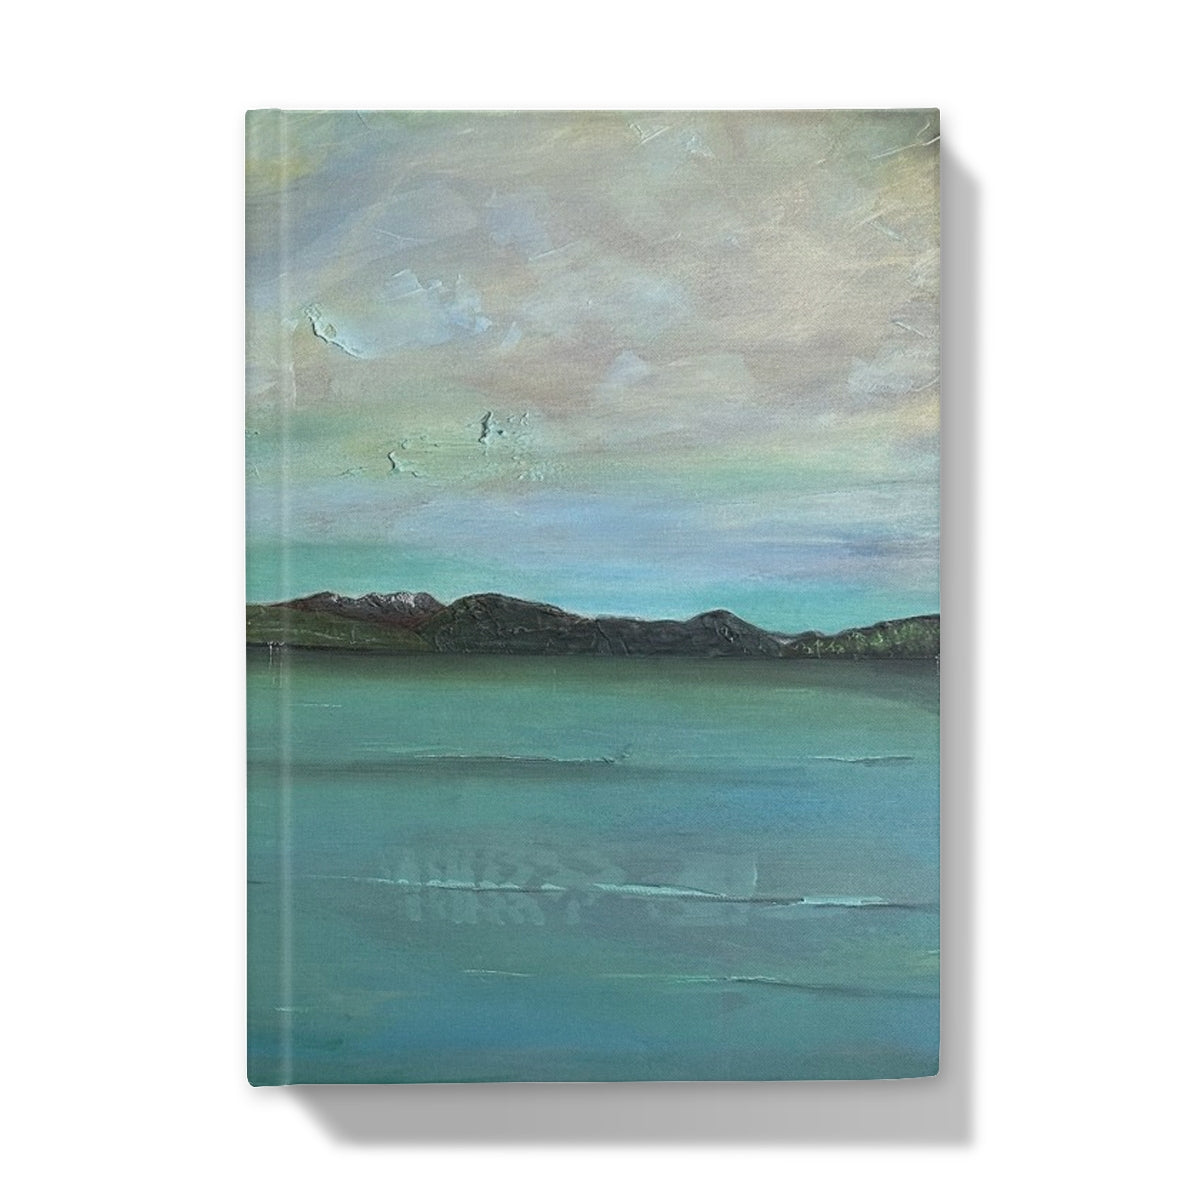 An Ethereal Loch Lomond Art Gifts Hardback Journal-Journals & Notebooks-Scottish Lochs & Mountains Art Gallery-5"x7"-Lined-Paintings, Prints, Homeware, Art Gifts From Scotland By Scottish Artist Kevin Hunter